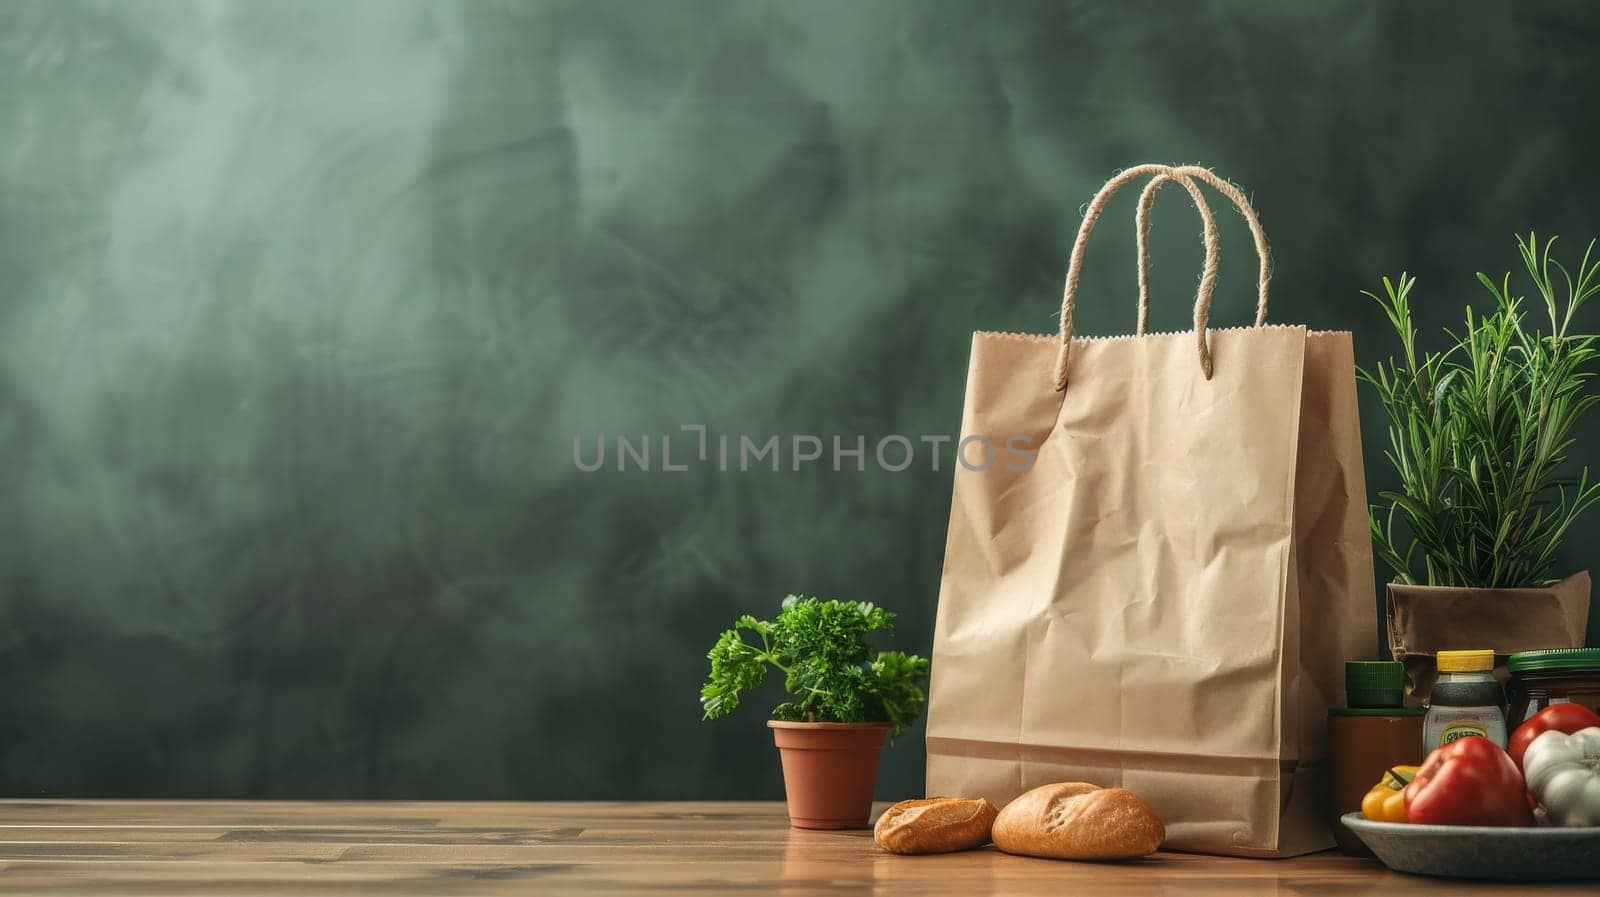 A brown paper bag with vegetables and bread on a table. The bag is placed in front of a potted plant and a bowl of food. Concept of freshness and abundance, as the vegetables and bread are healthy